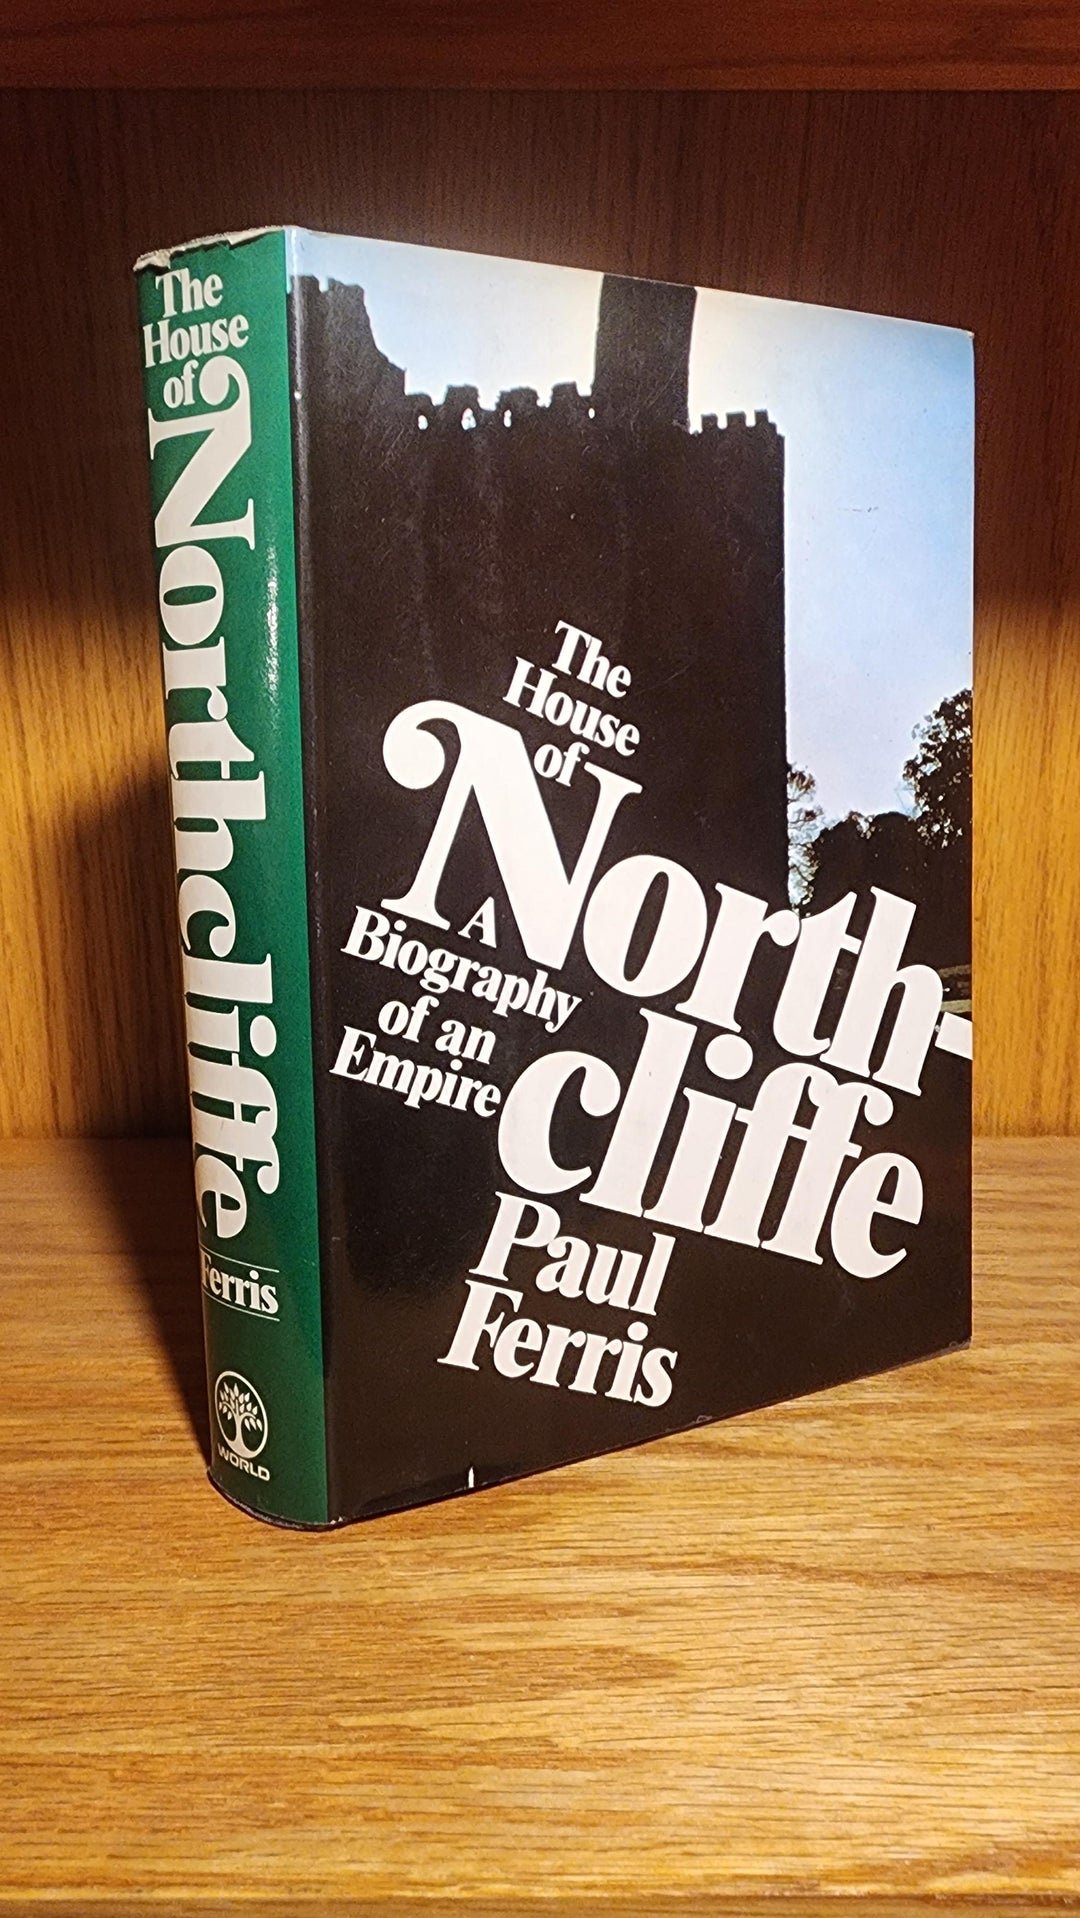 The House of Northcliffe: A Biography of an Empire Hardcover by Paul Ferris (Author) First Edition